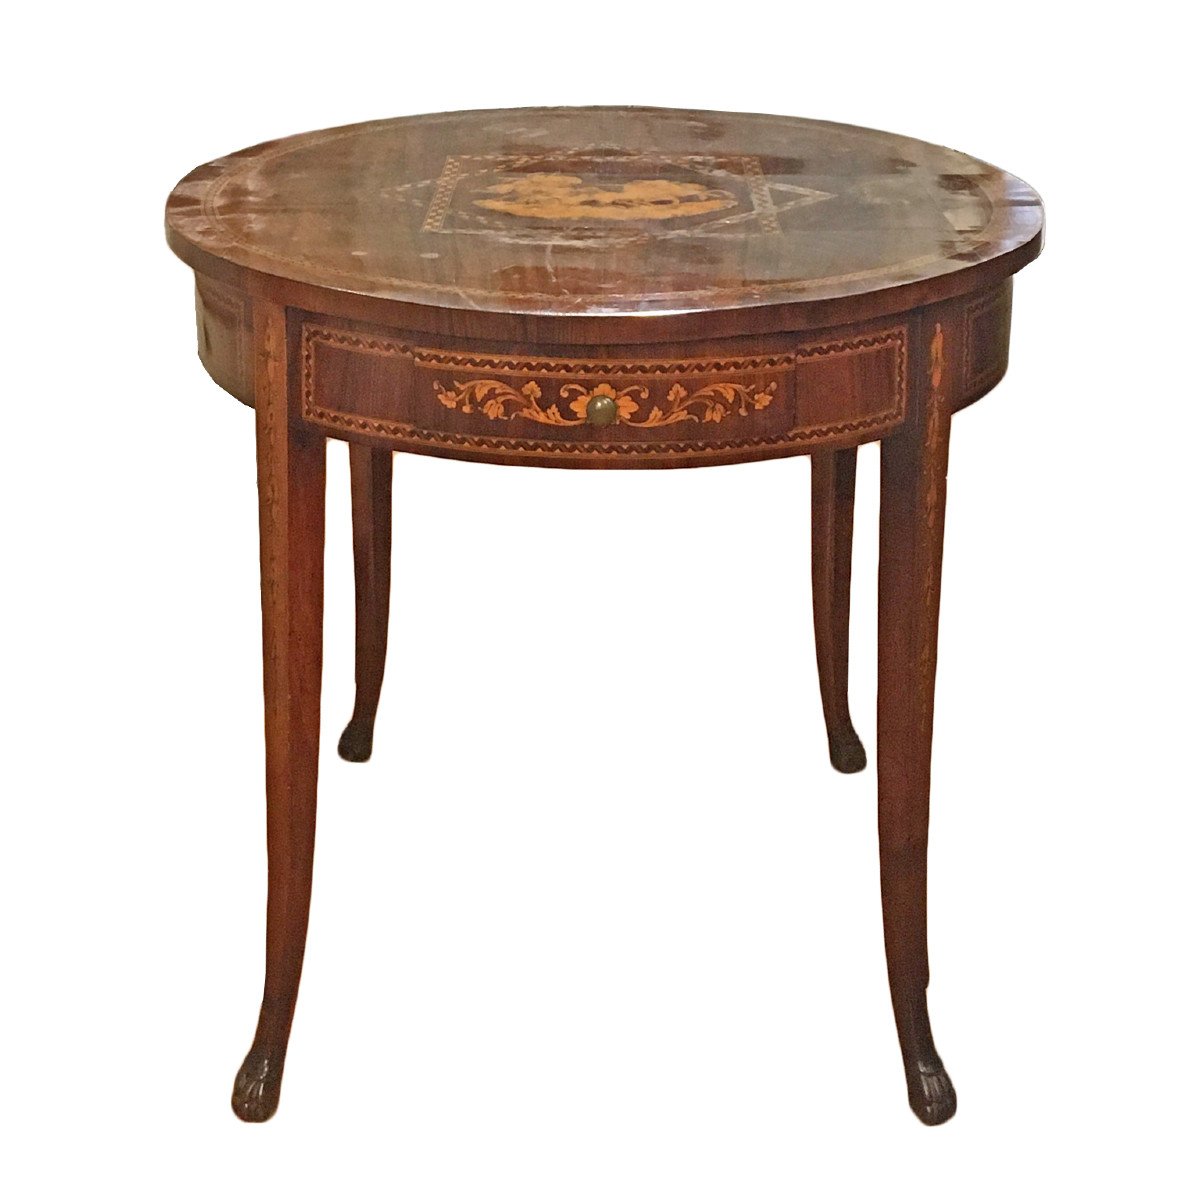 Early 19th Century Tuscan Directorio Table In Walnut And Fruit Wood